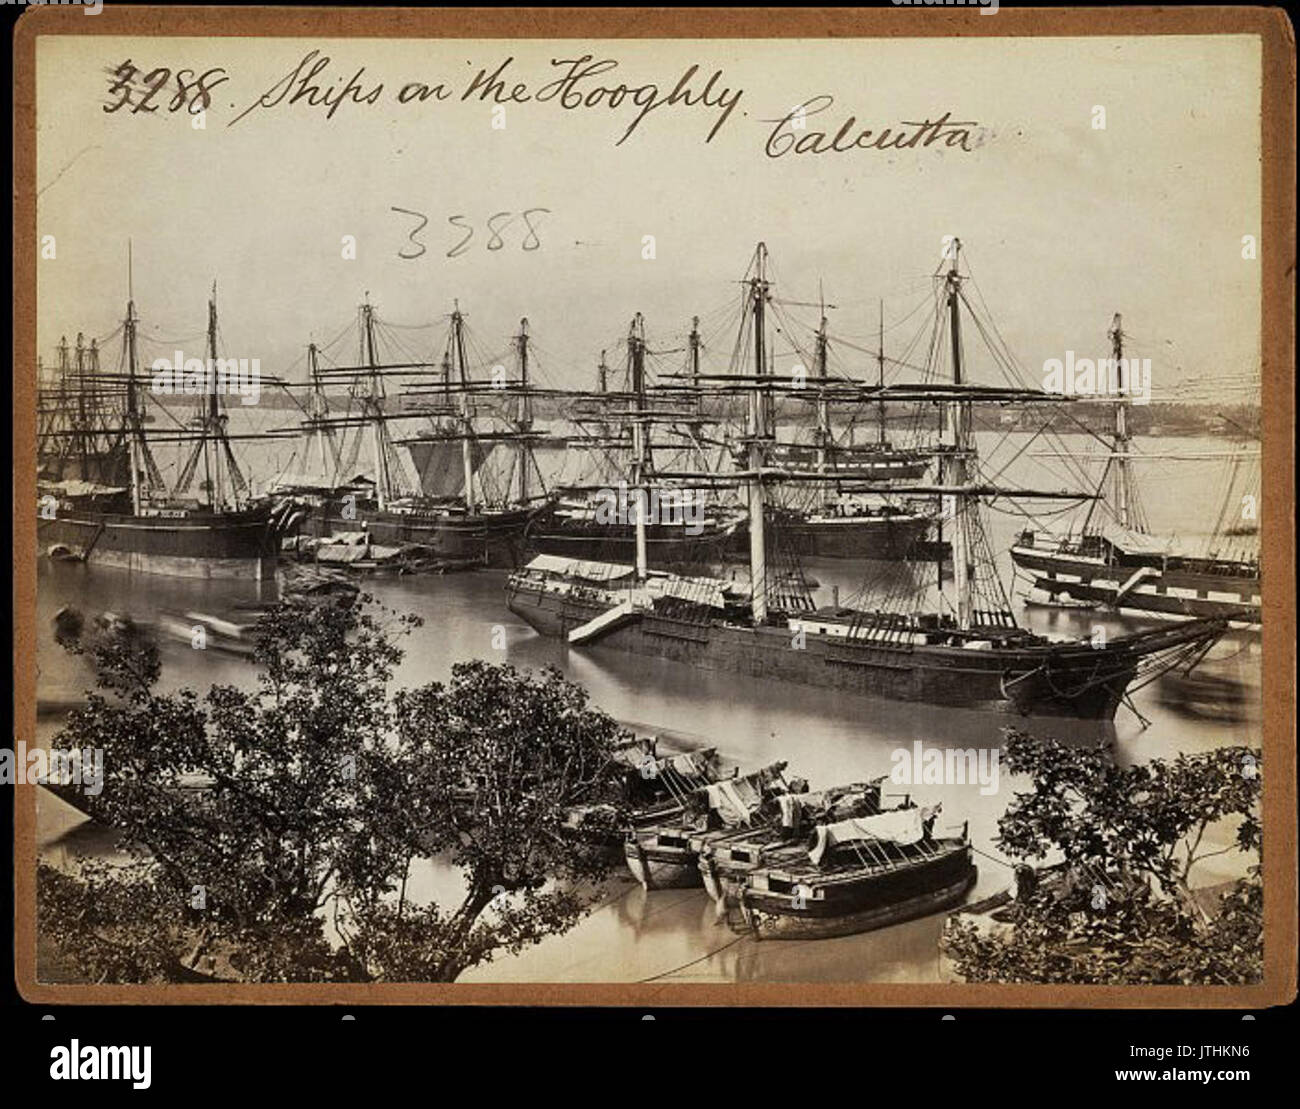 Ships on the Hooghly in Calcutta by Francis Frith Stock Photo